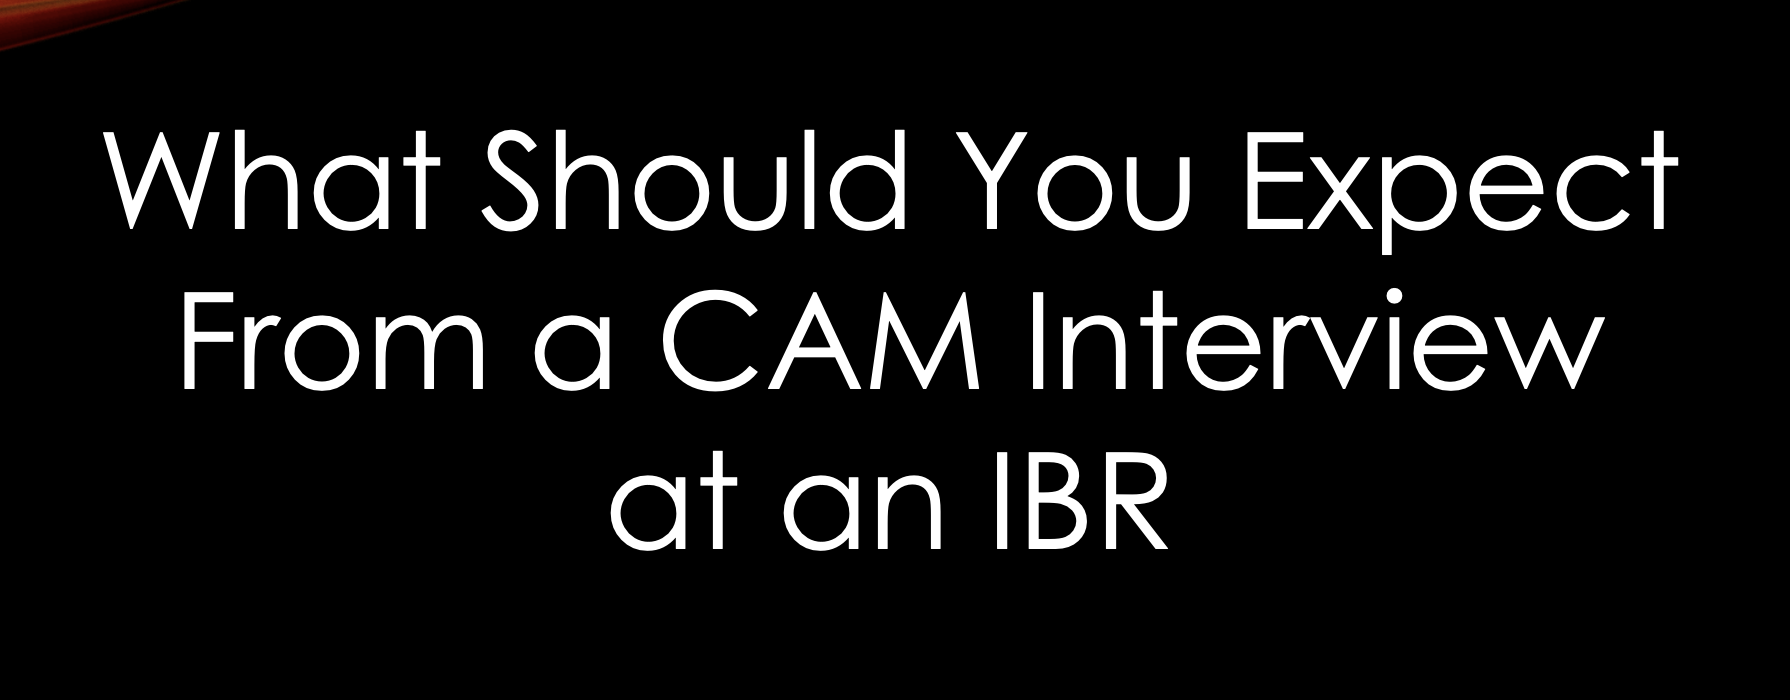 What Should You Expect From a CAM Interview at an IBR